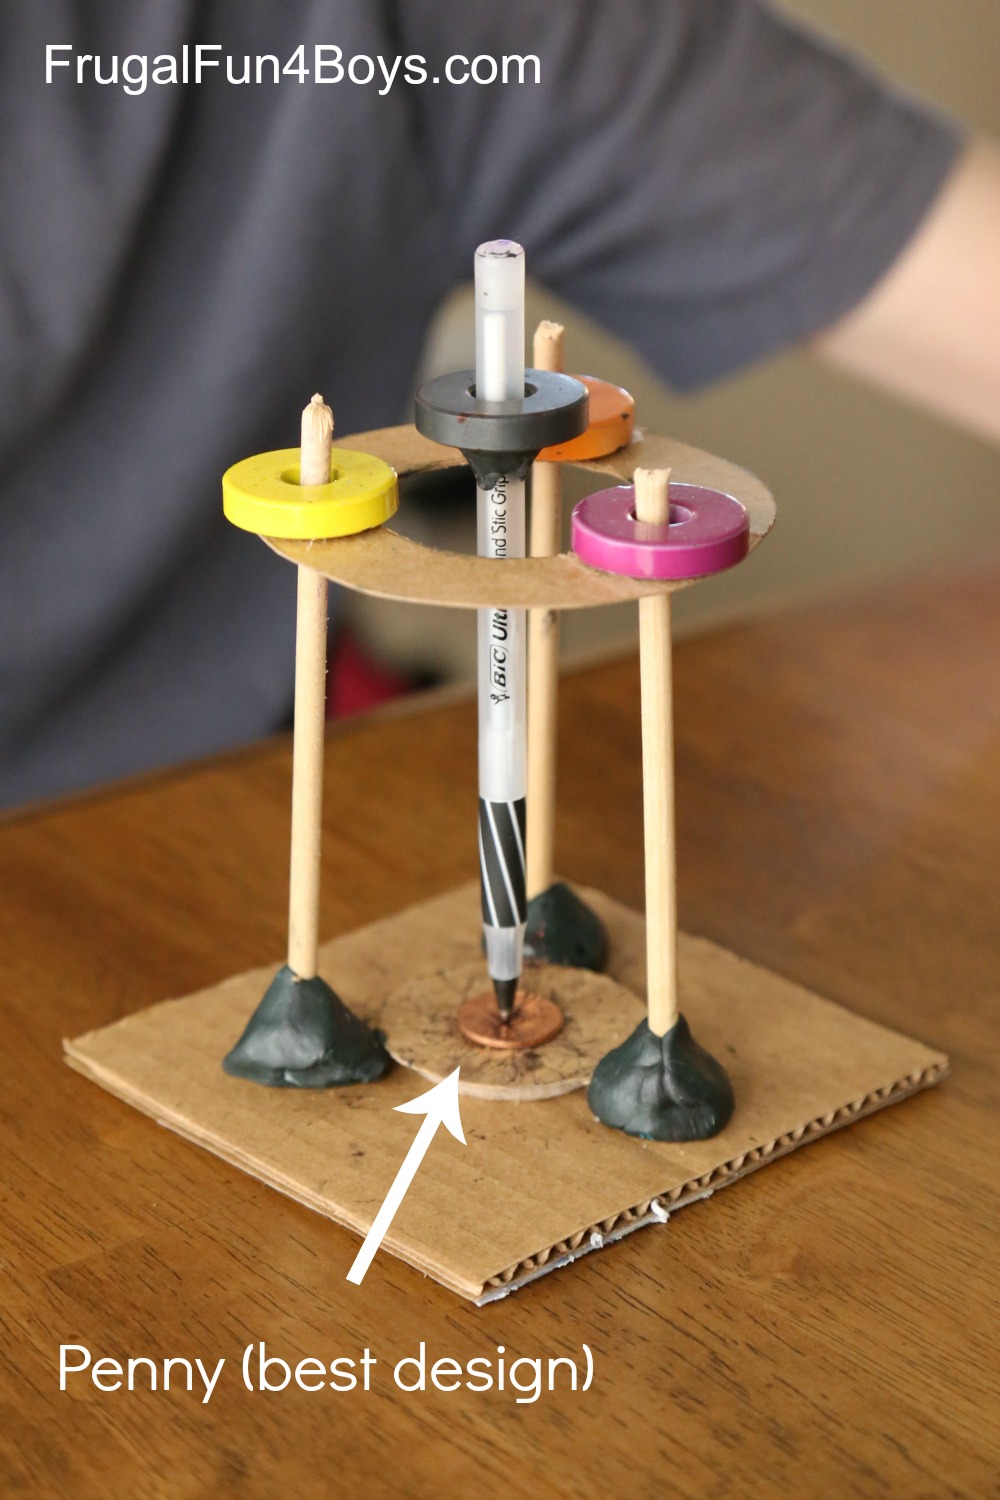 Magic Spinning Pen - A Magnet Science Experiment for Kids